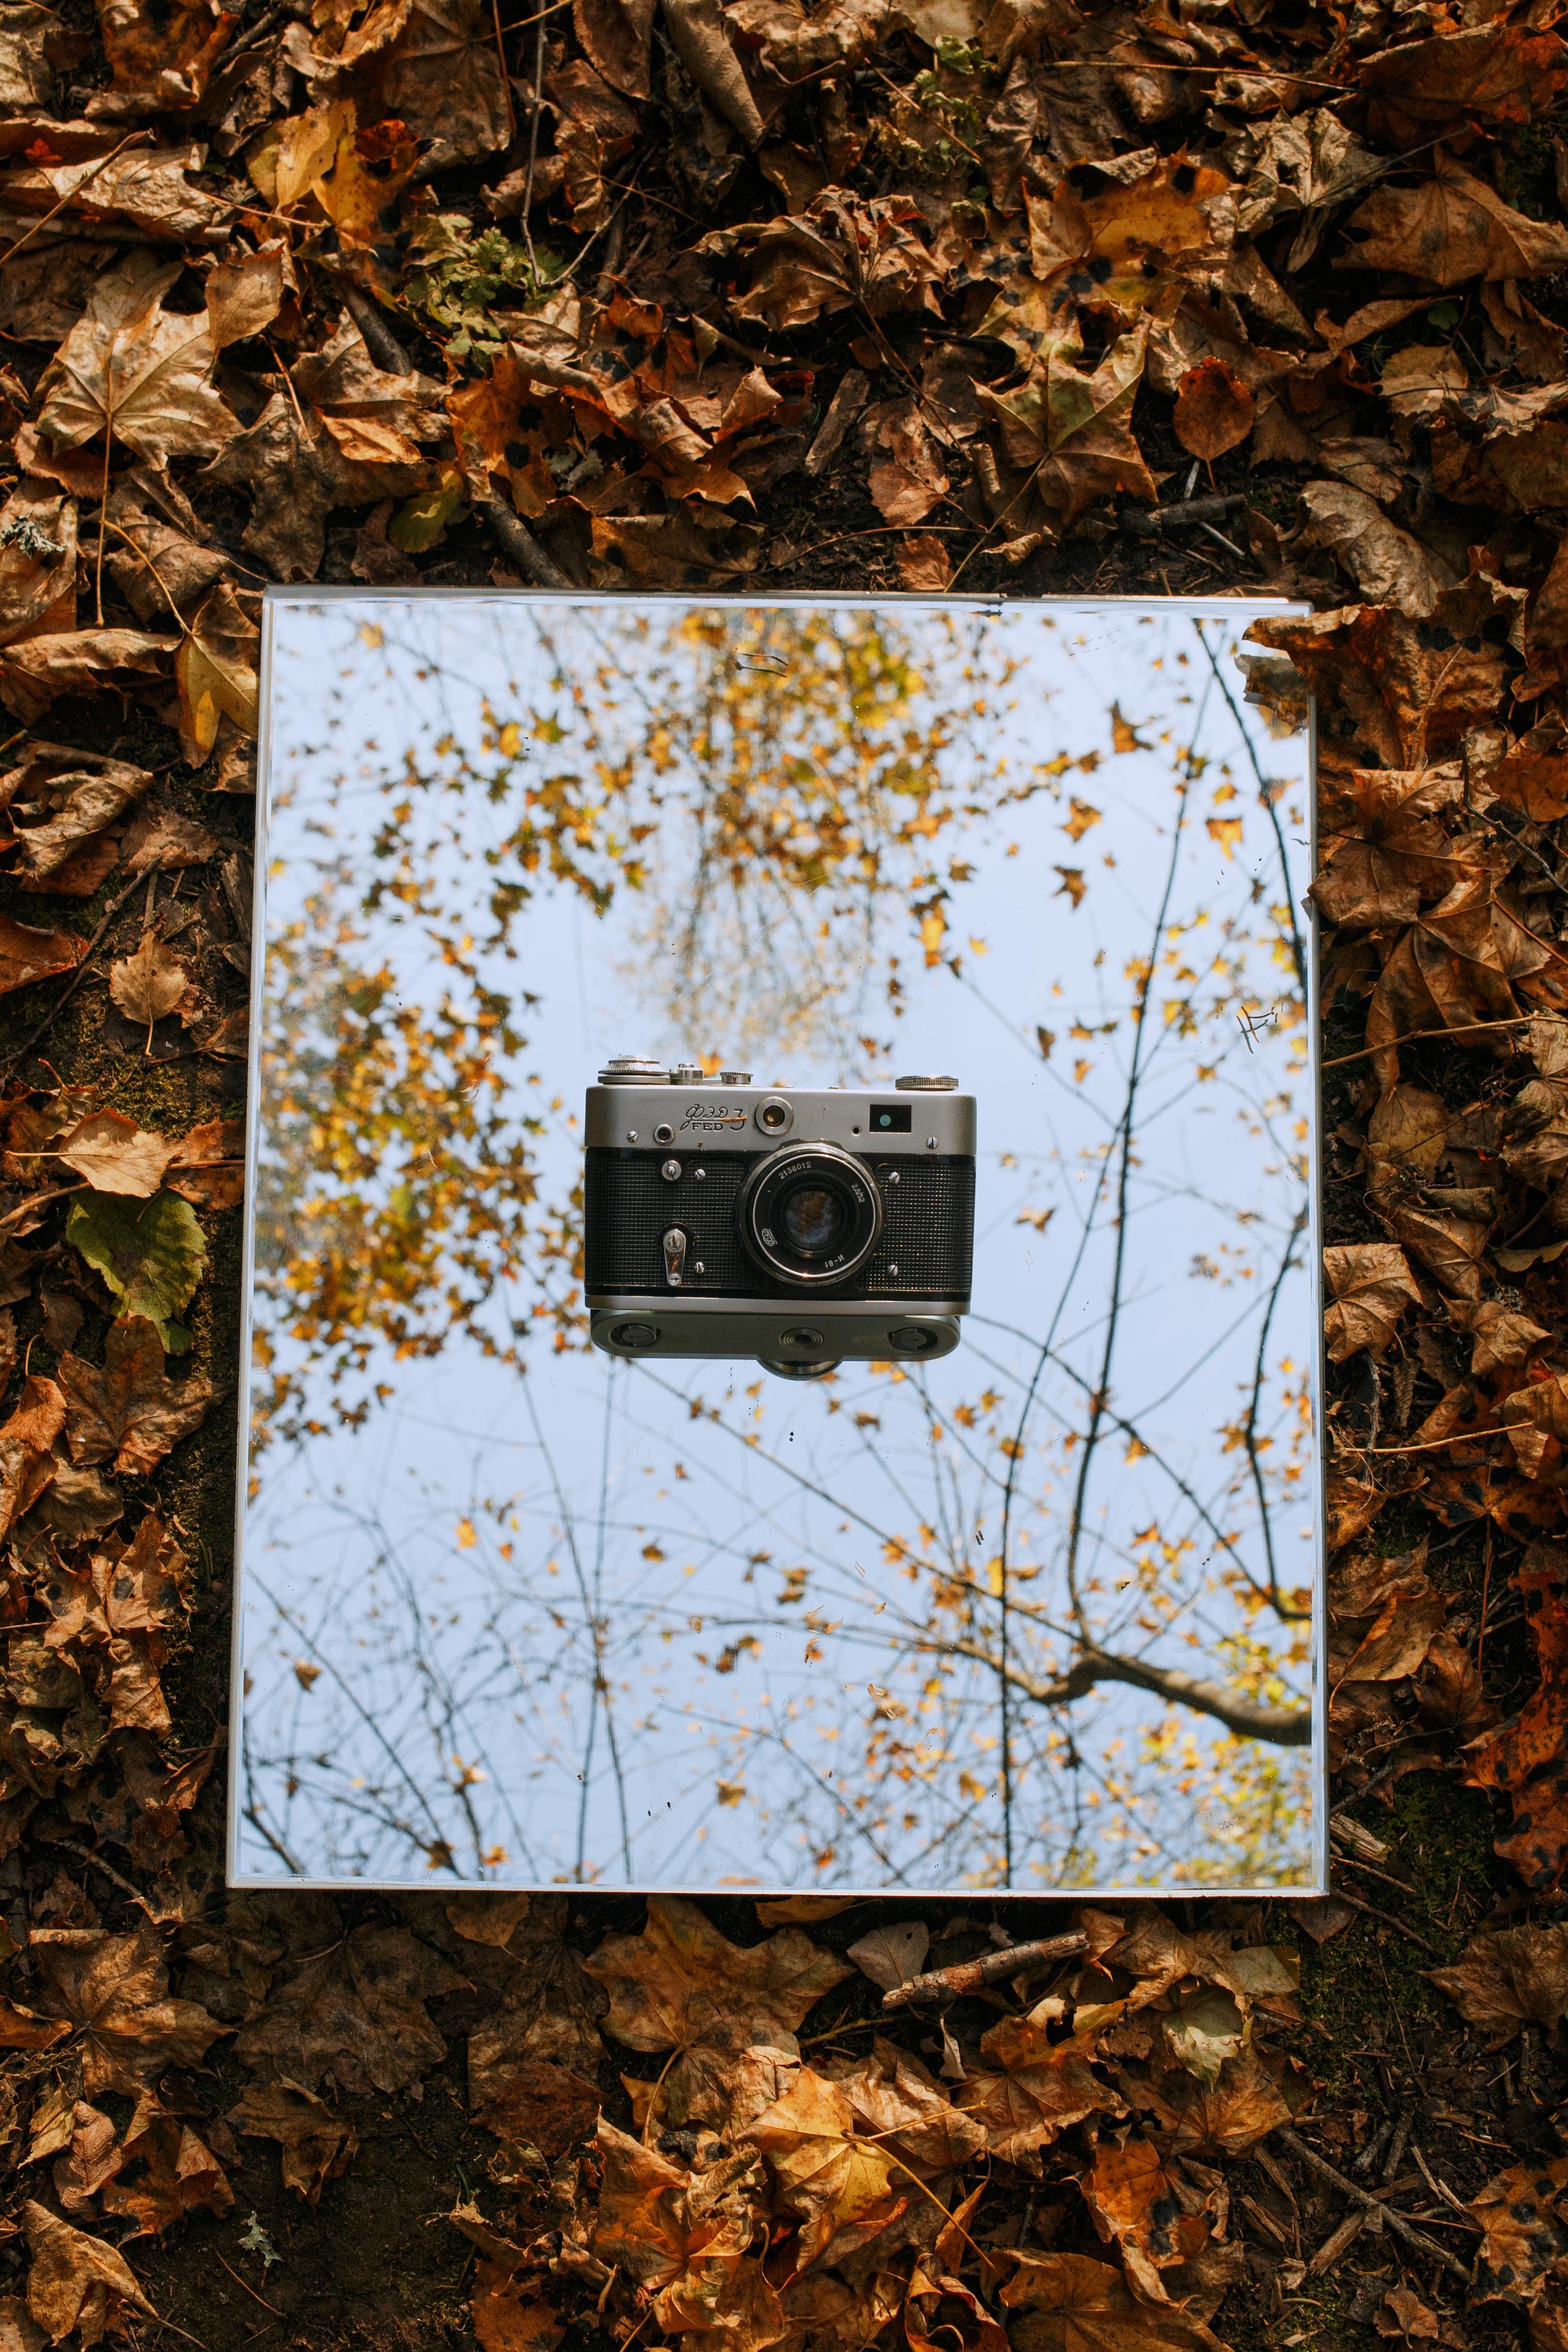 leaves, camera, vintage, autumn HD Wallpaper for Phone